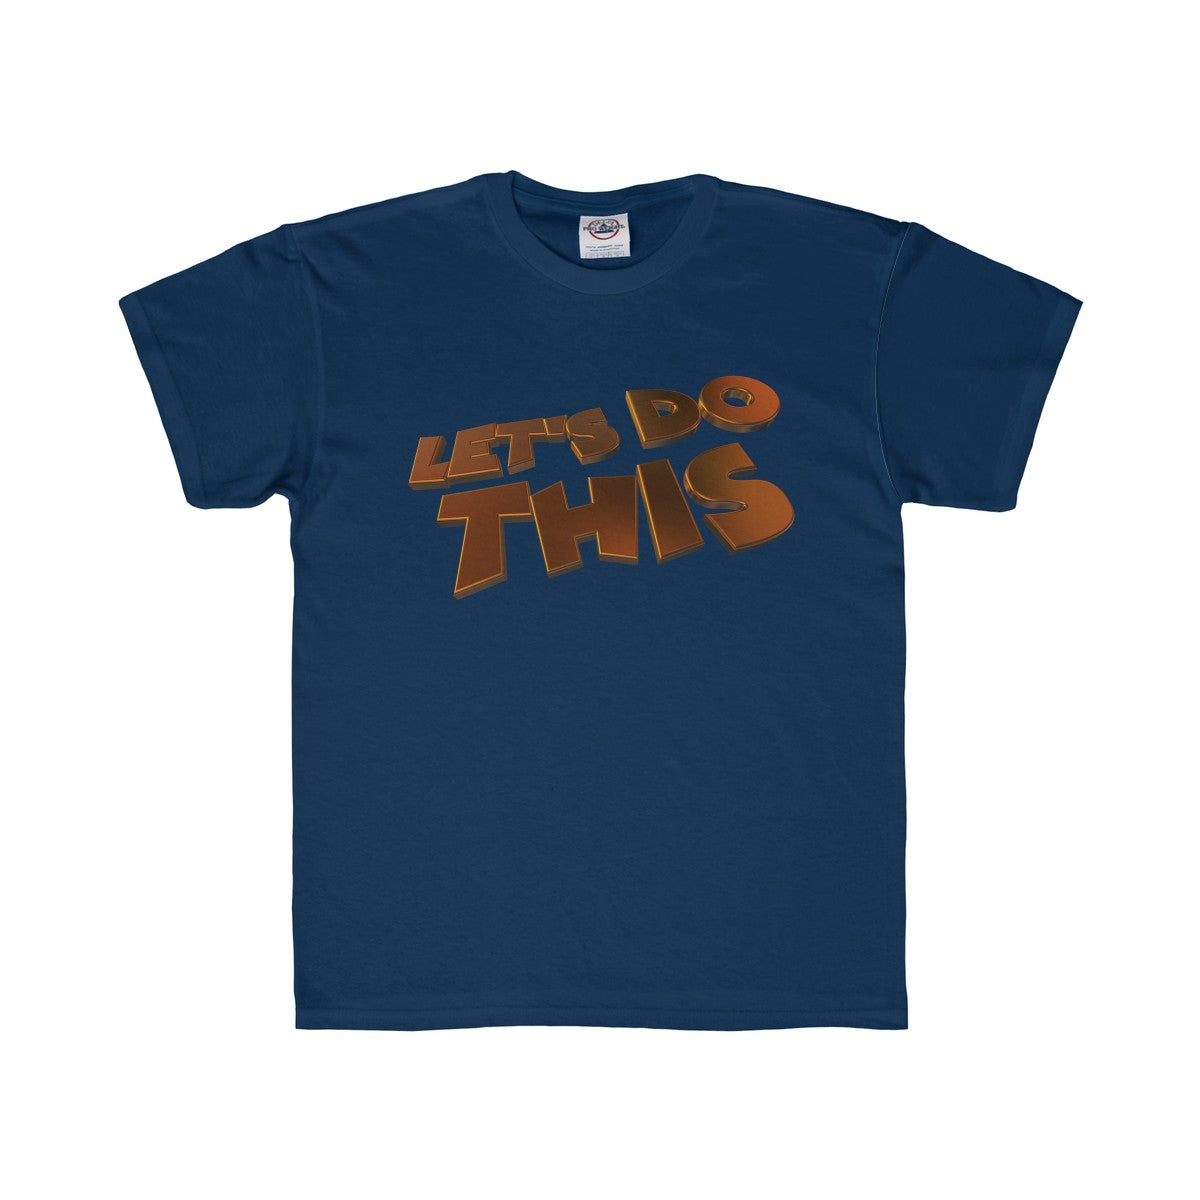 Let's Do This Kids Regular Fit Tee-Kids clothes-PureDesignTees